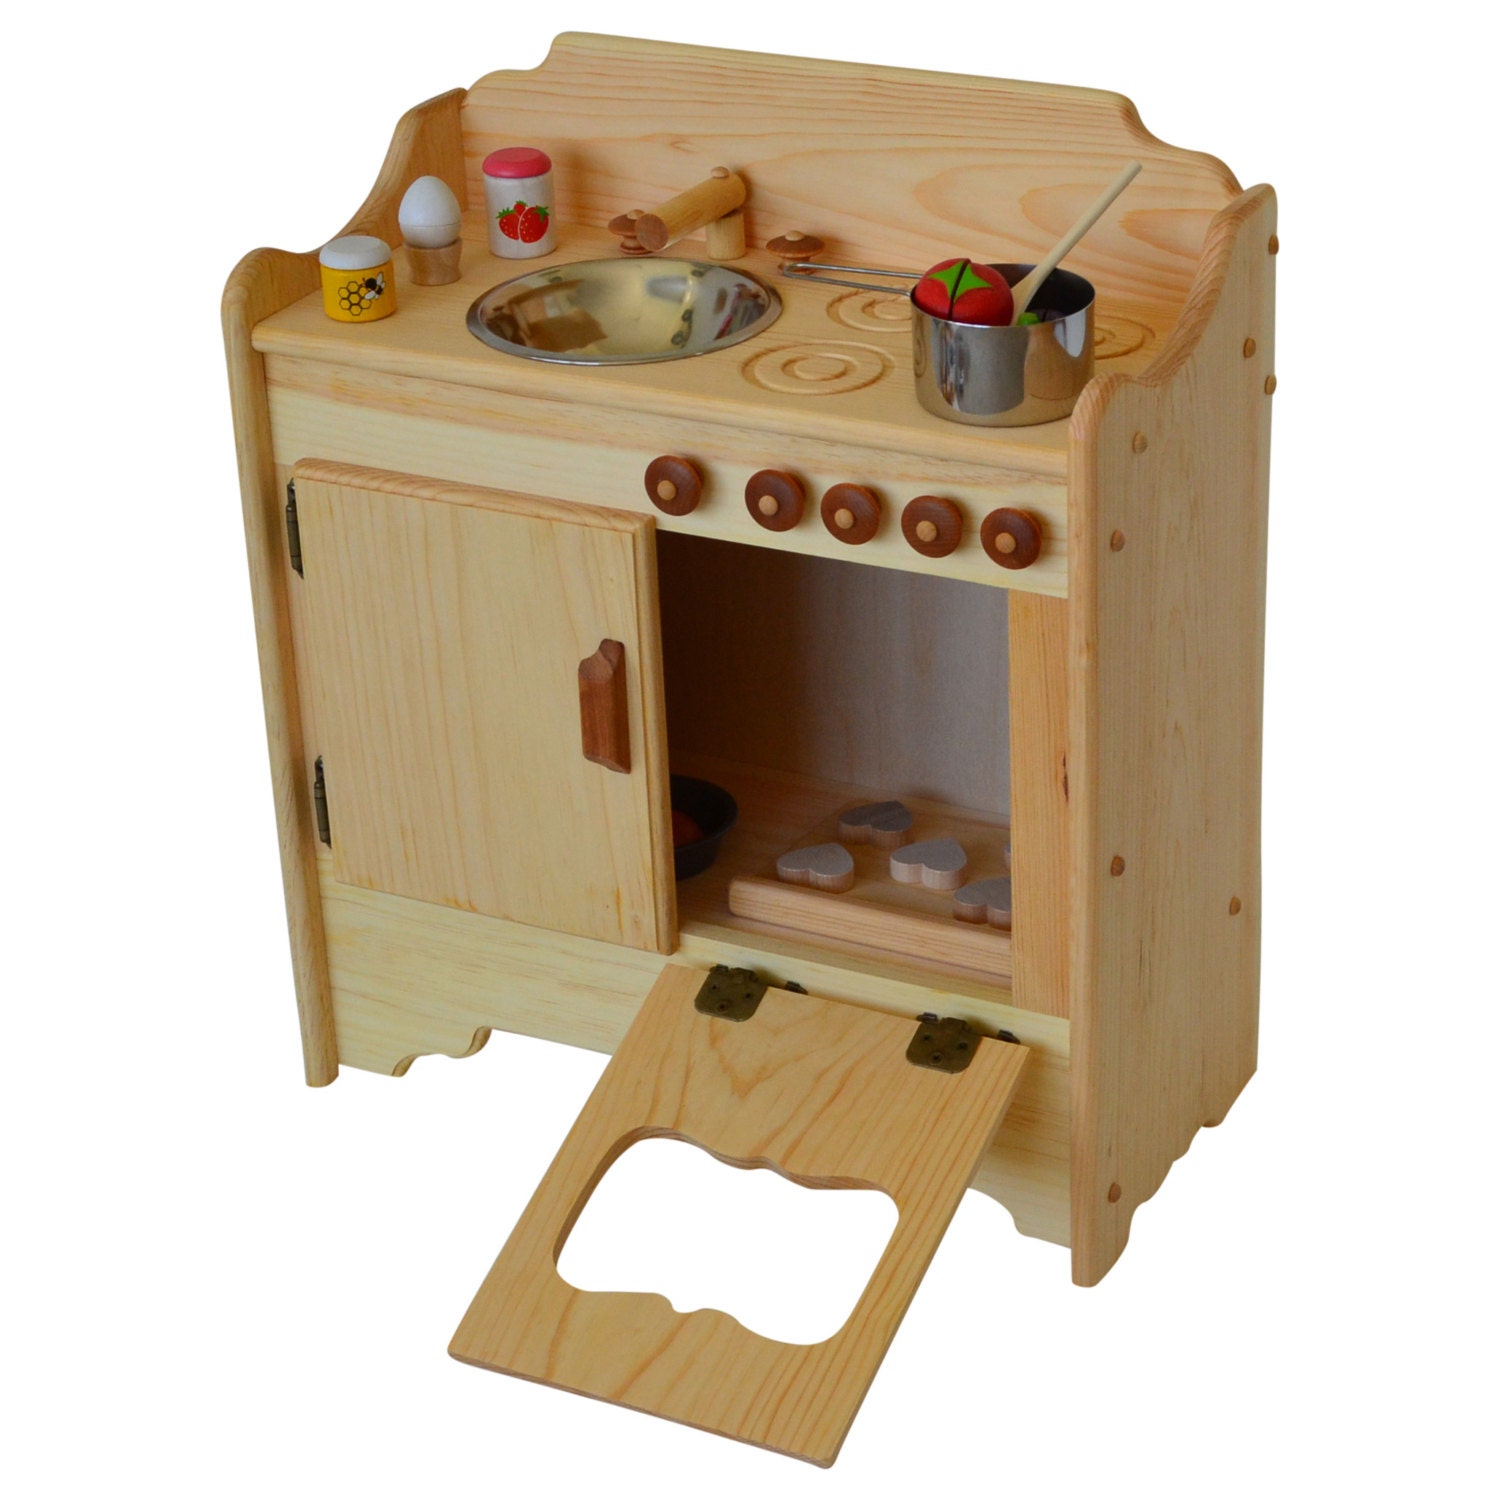 Natural Wooden Play Kitchen-Wooden Toy by AToymakersDaughter